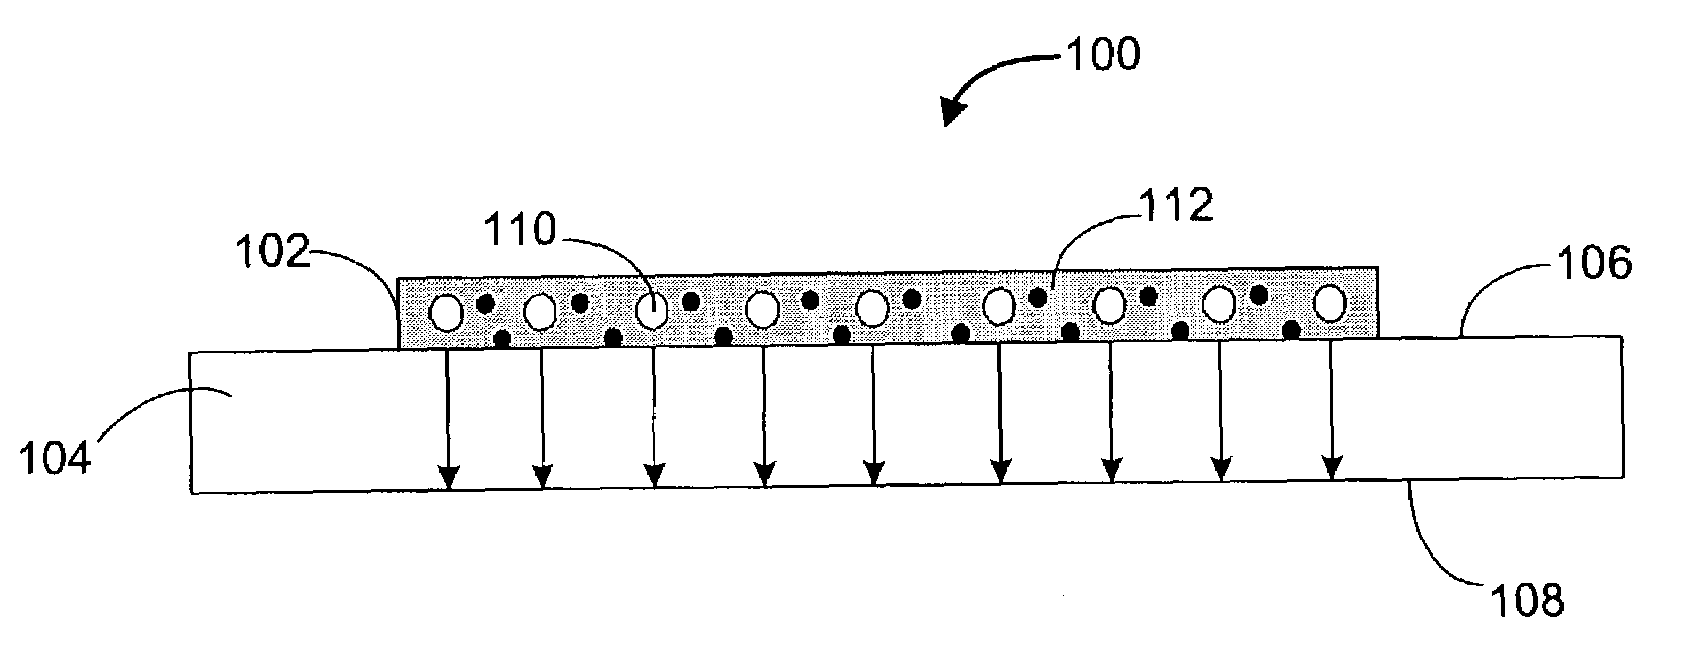 System for producing secure toner-based images and methods of forming and using the same